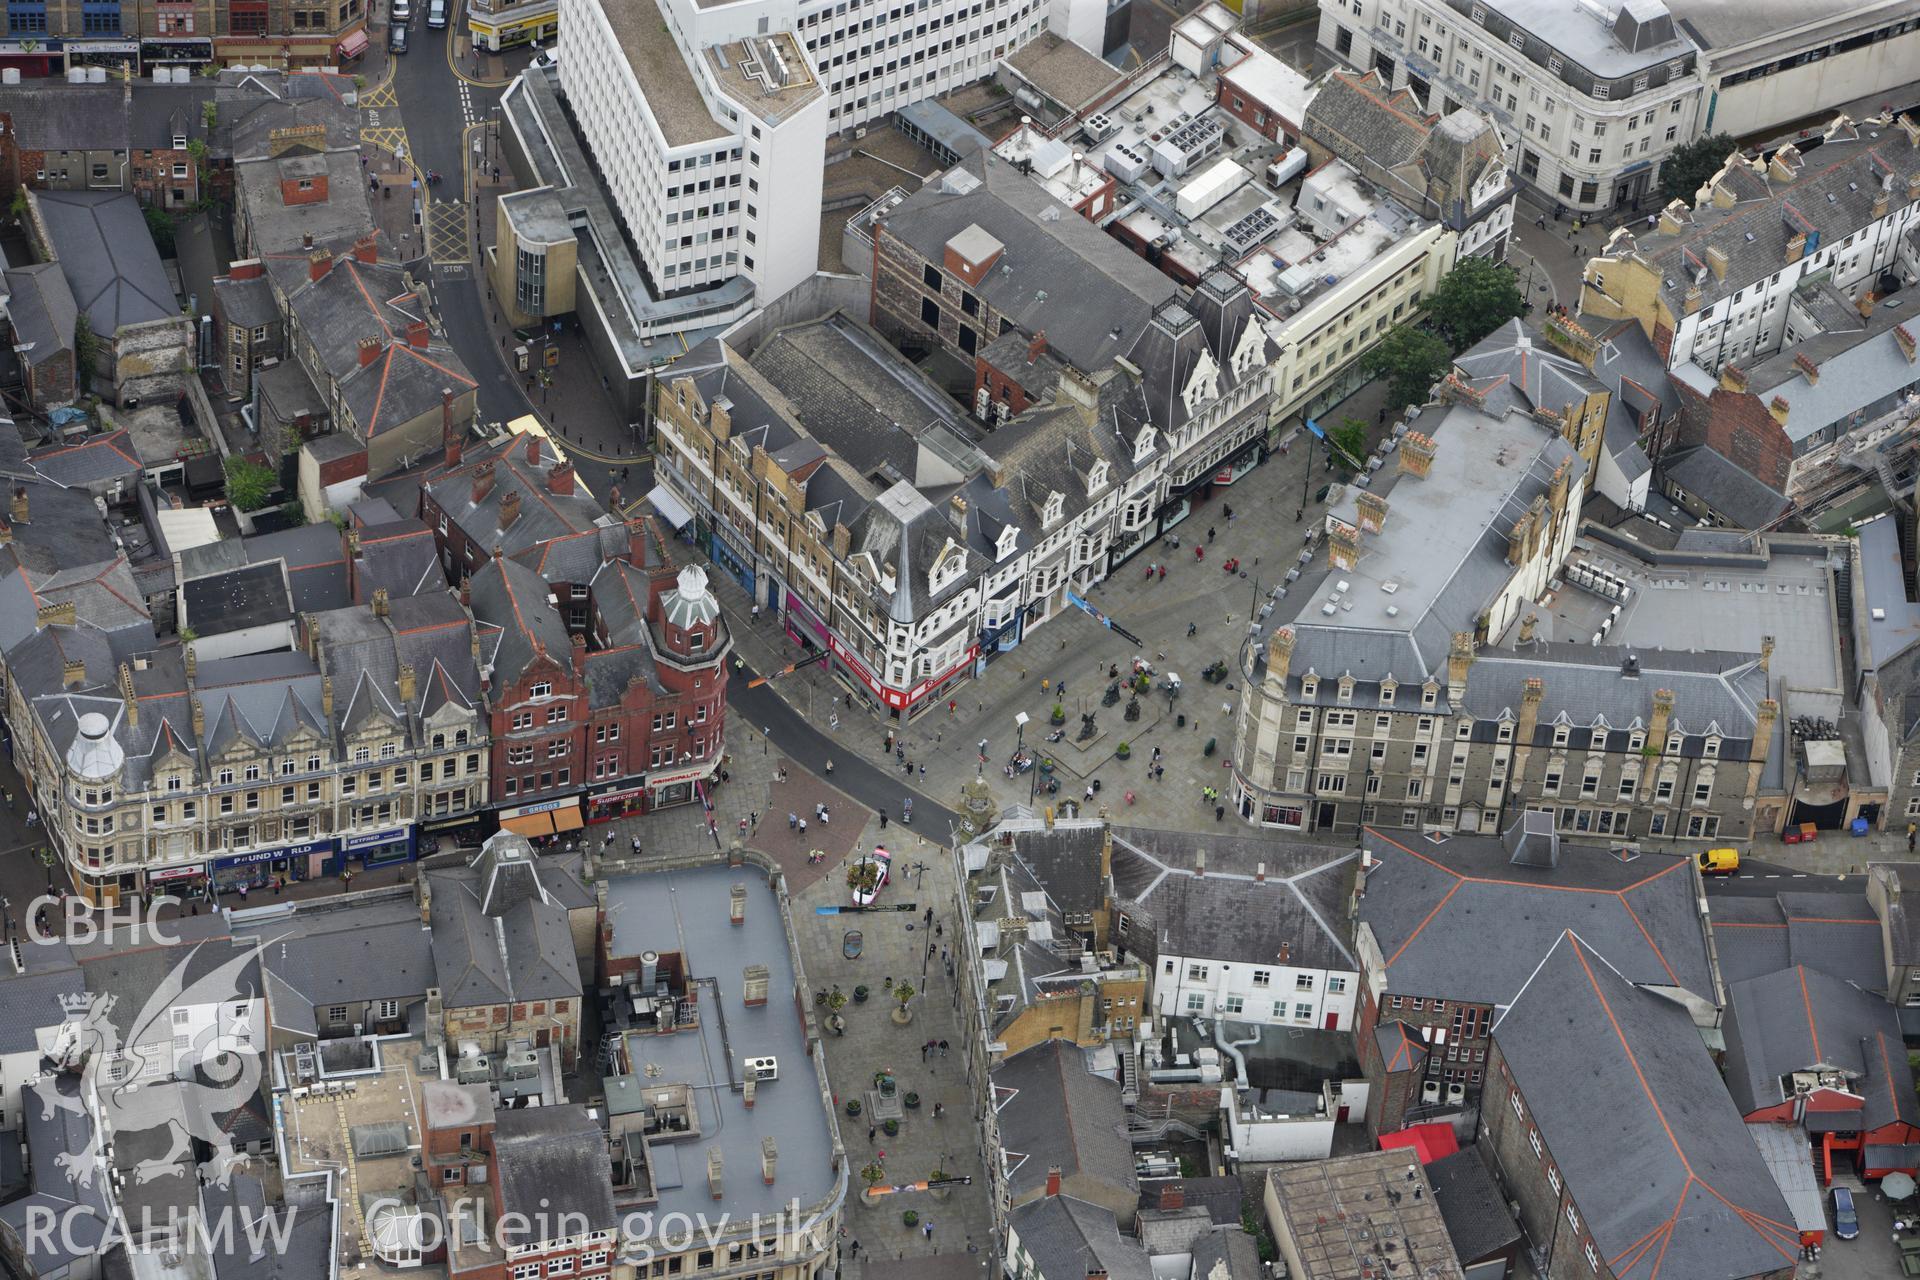 RCAHMW colour oblique aerial photograph showing centre of Newport, Gwent. Taken on 09 July 2009 by Toby Driver